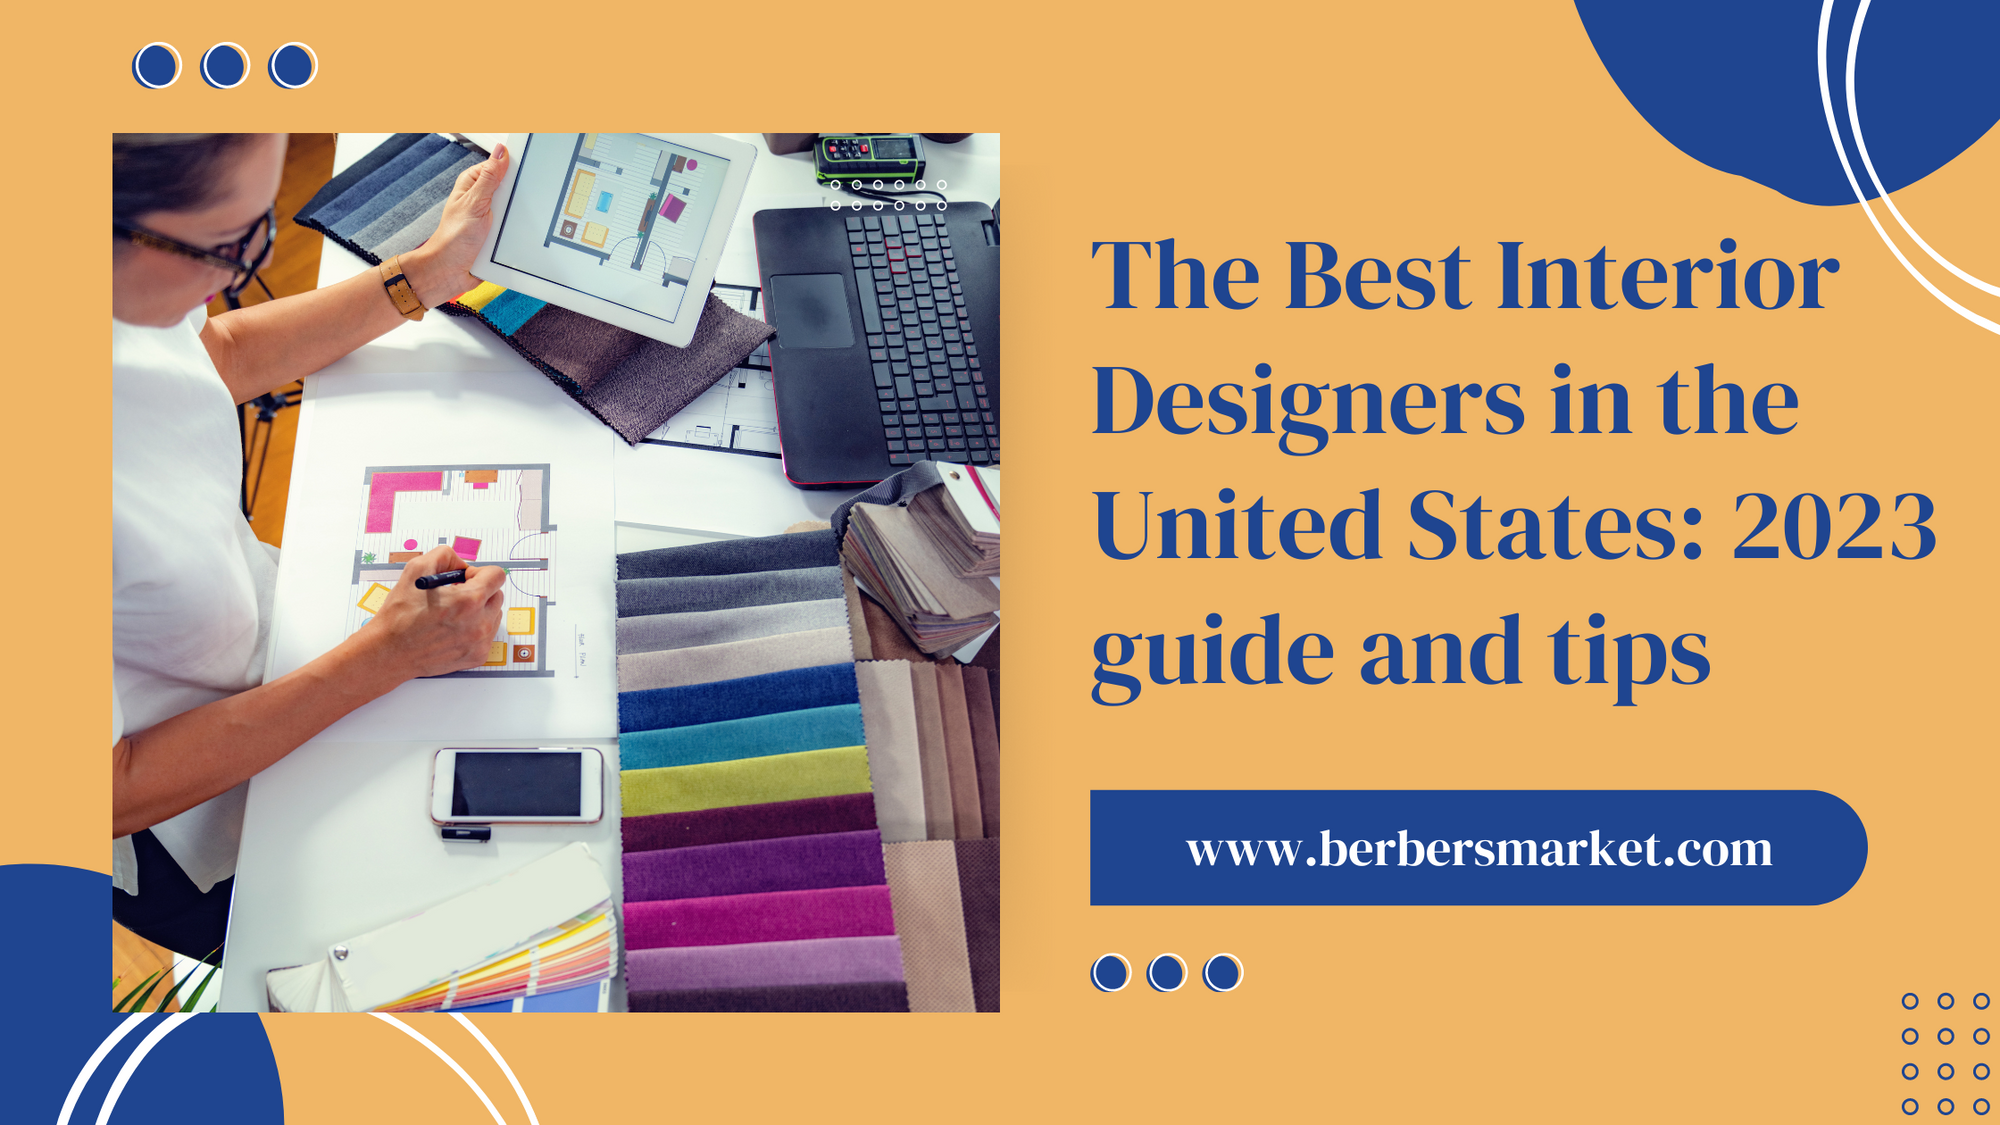 Blog banner talking about: "The Best Interior Designers in the United States: 2023 guide and tips " with a picture showing interior-designers-working-with-colour-chart-and-looking-at-samples.